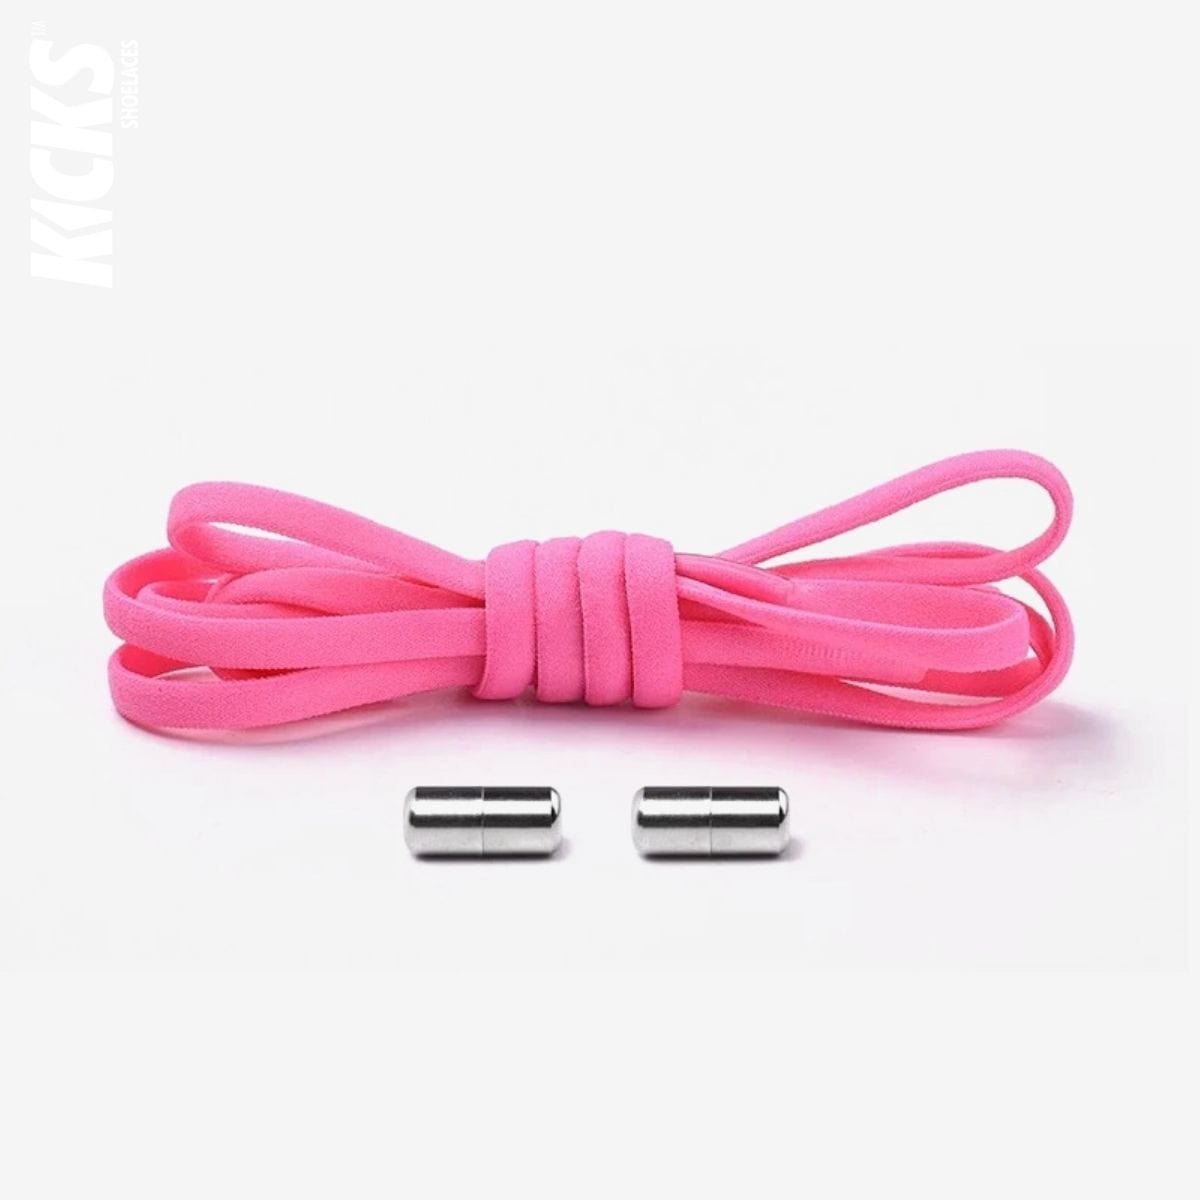 rose-pink-kids-elastic-no-tie-shoe-laces-for-sneakers-by-kicks-shoelaces